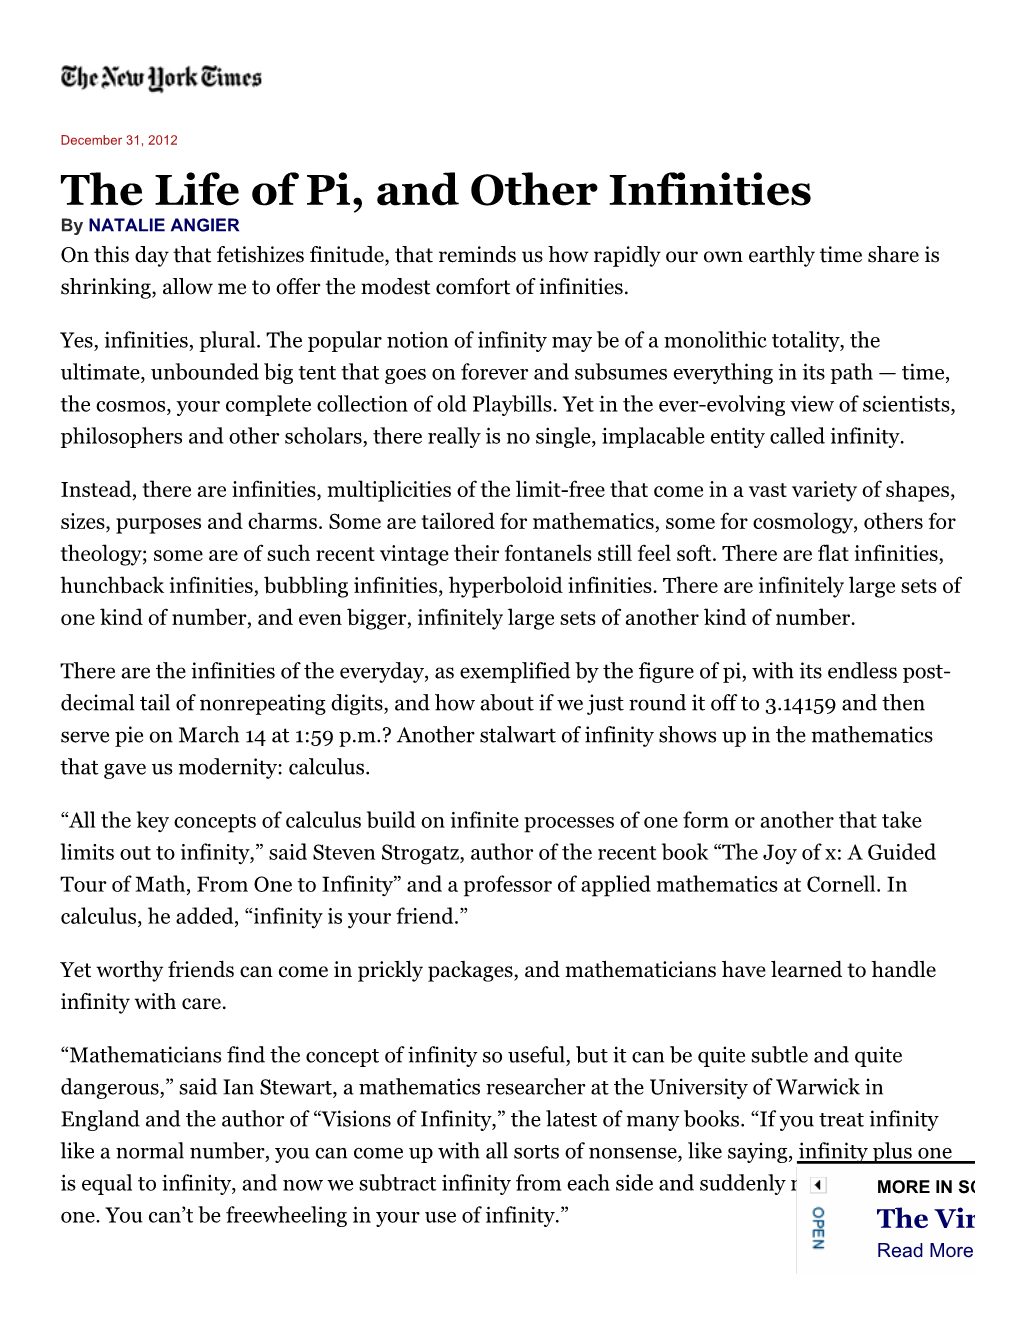 The Life of Pi, and Other Infinities